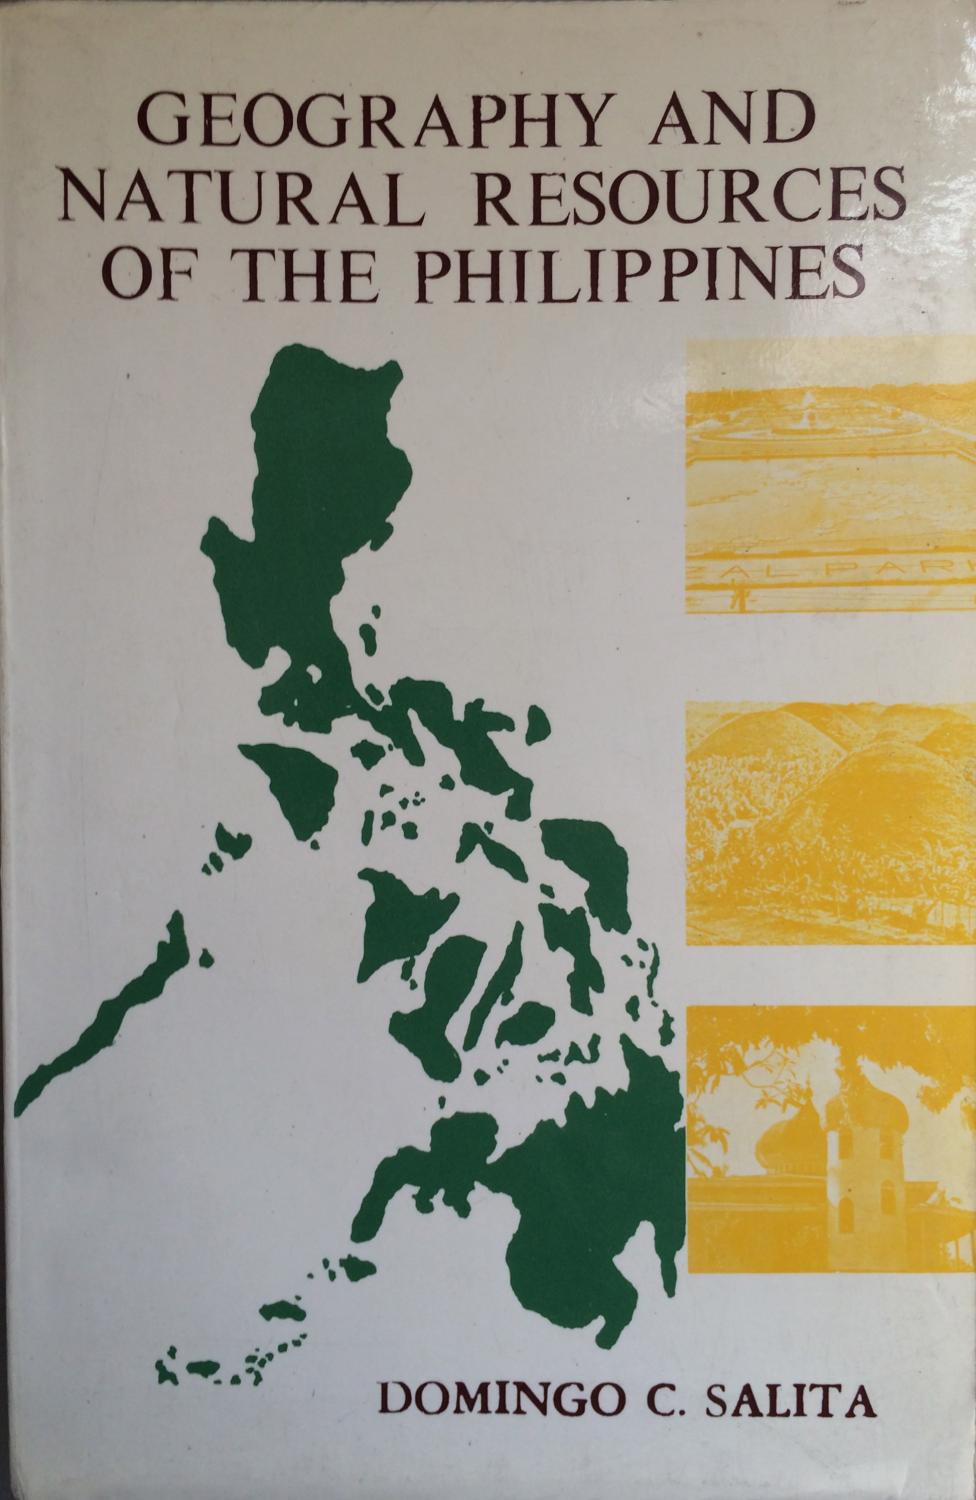 philippine culture and tourism geography book pdf